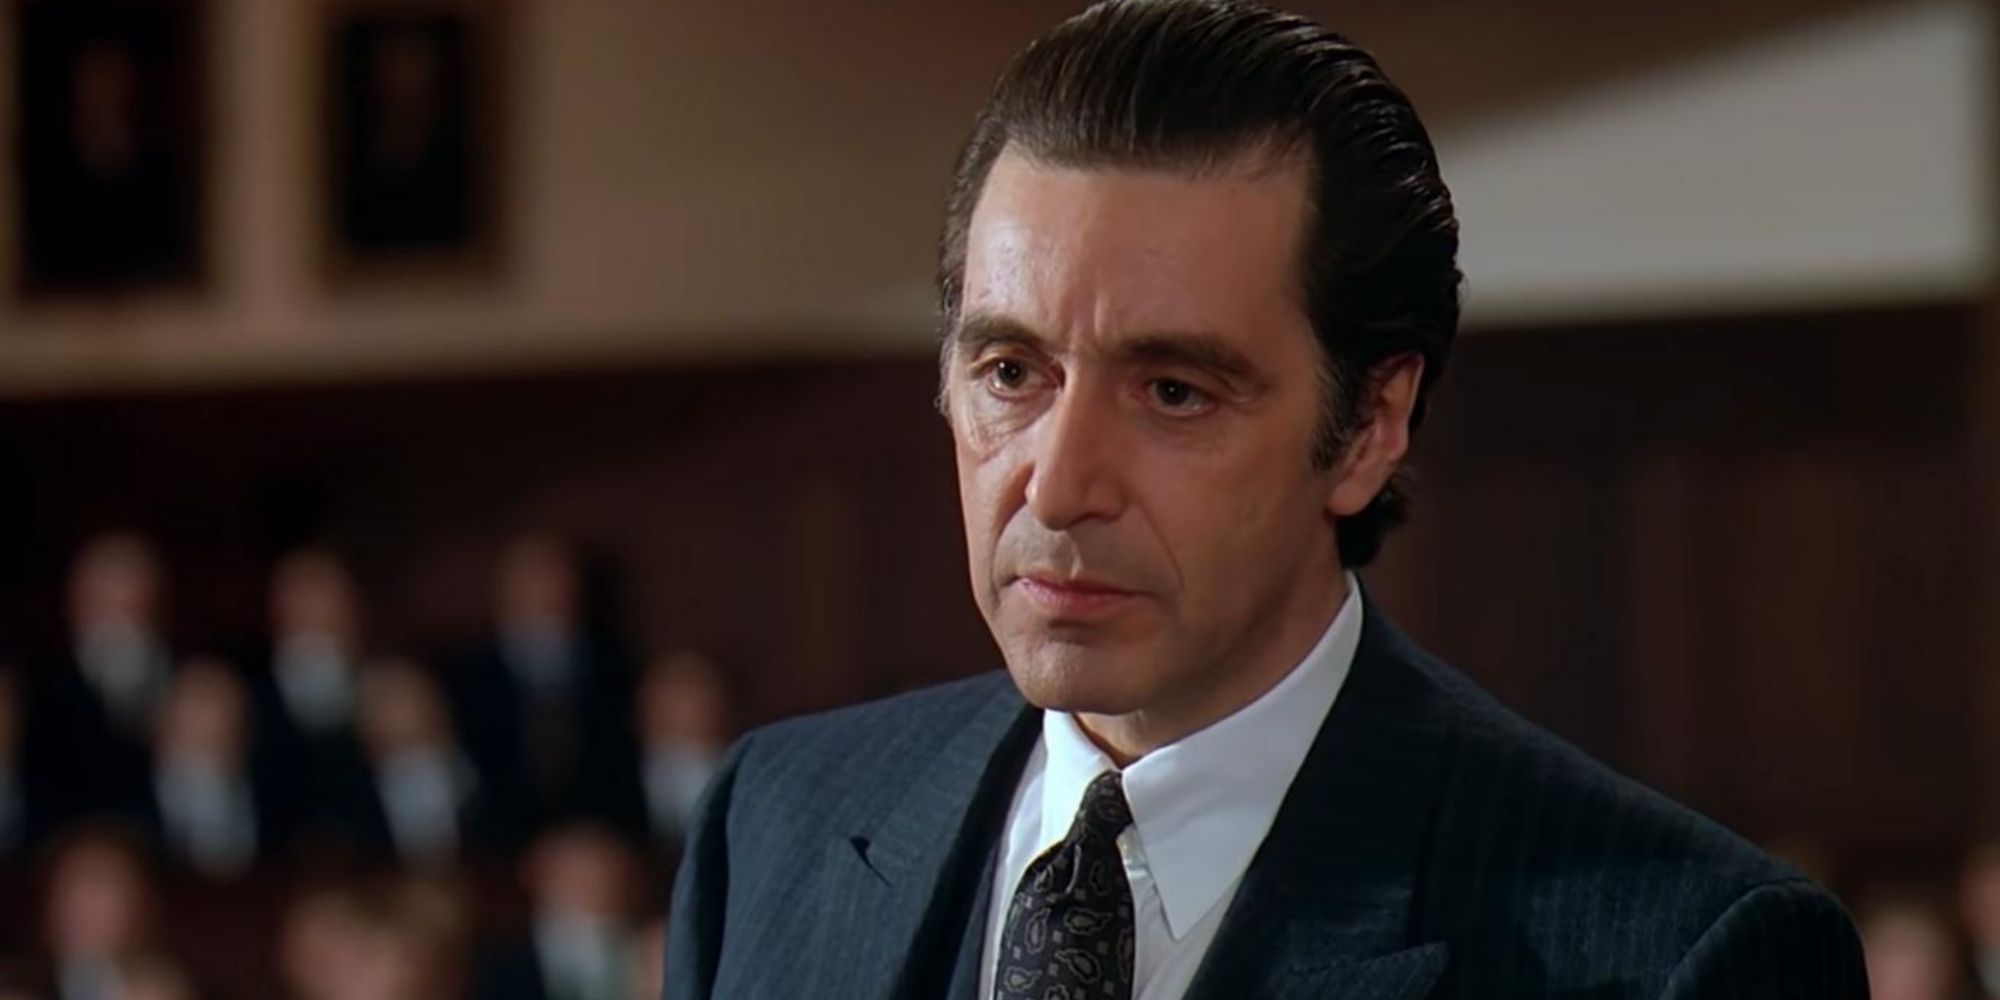 Al Pacino as Frank Slade stands up for Charlie at his school tribunal in Scent of a Woman